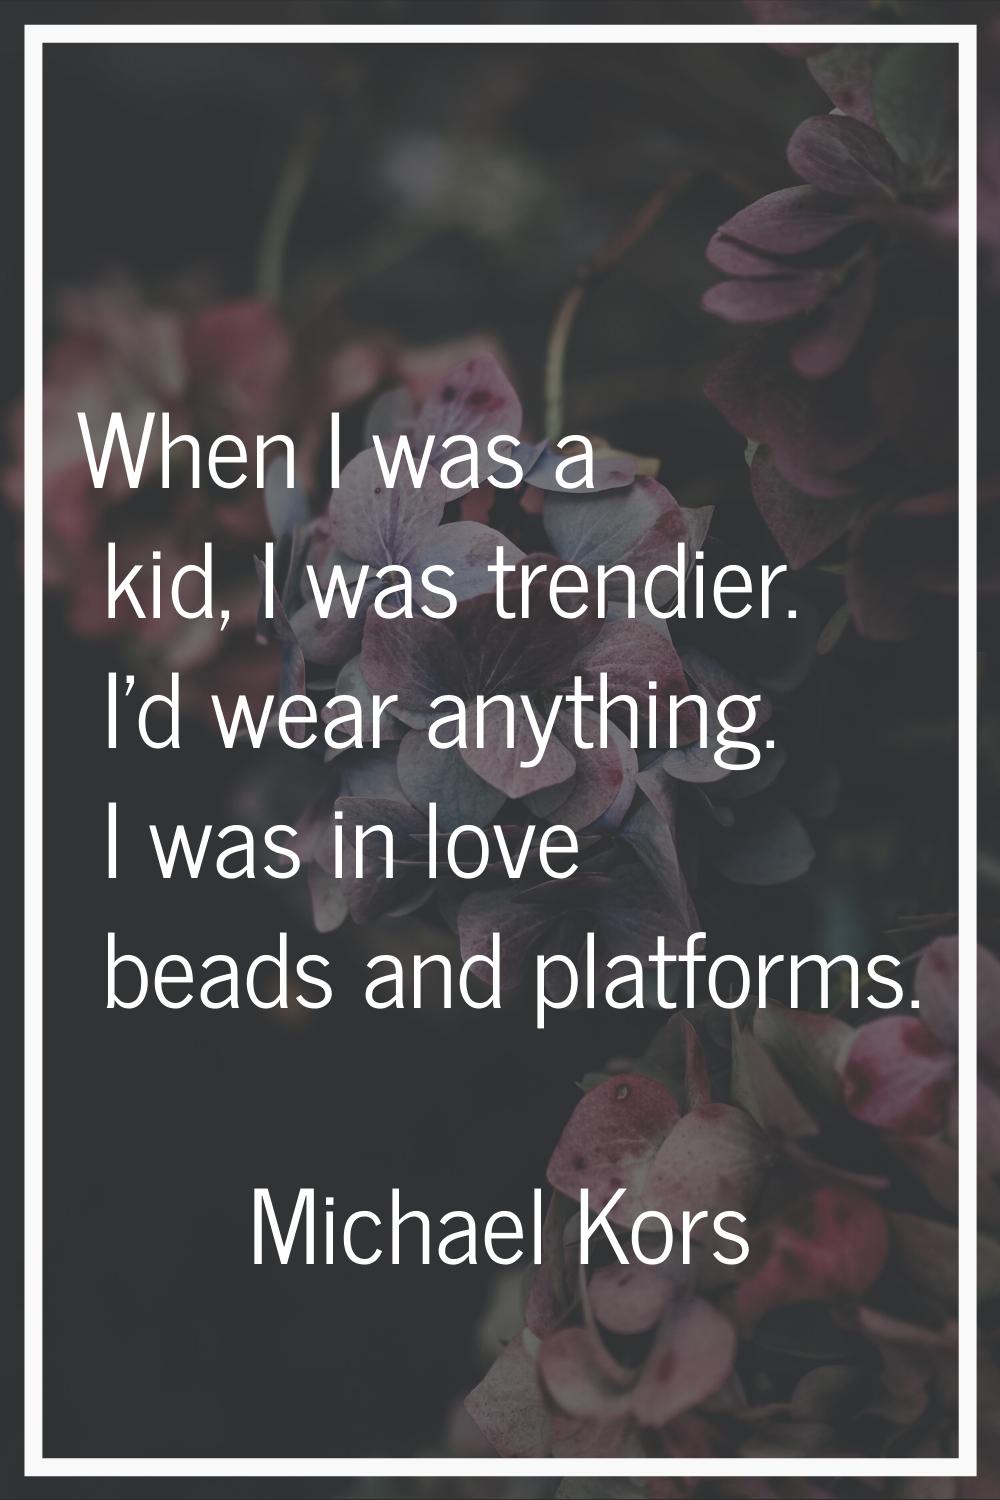 When I was a kid, I was trendier. I'd wear anything. I was in love beads and platforms.